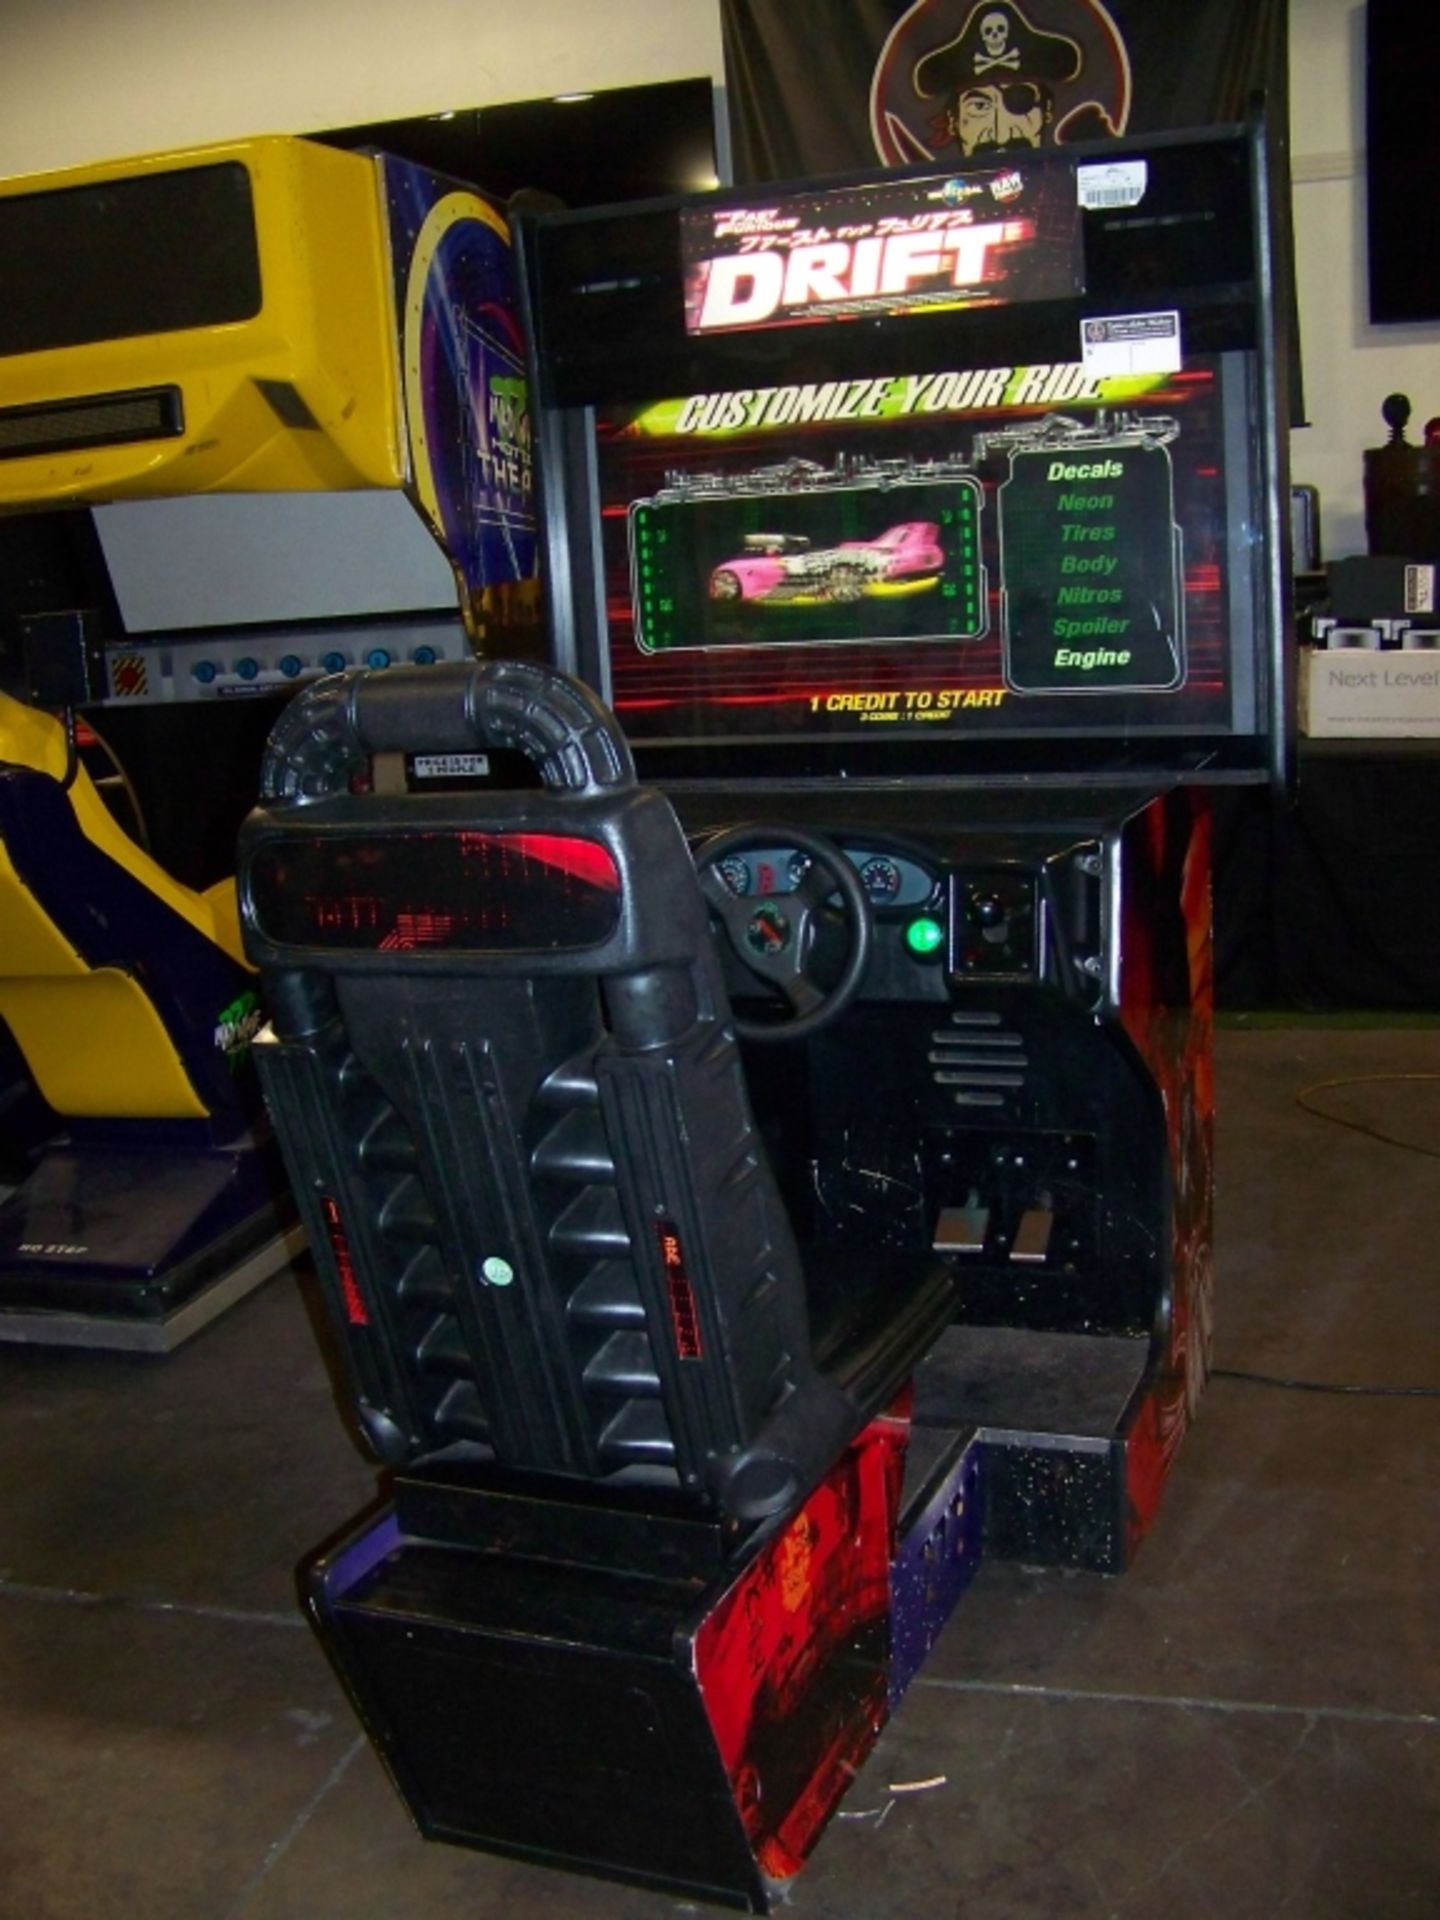 DRIFT FAST & FURIOUS DX 42" LCD RACING ARCADE GAME - Image 5 of 6